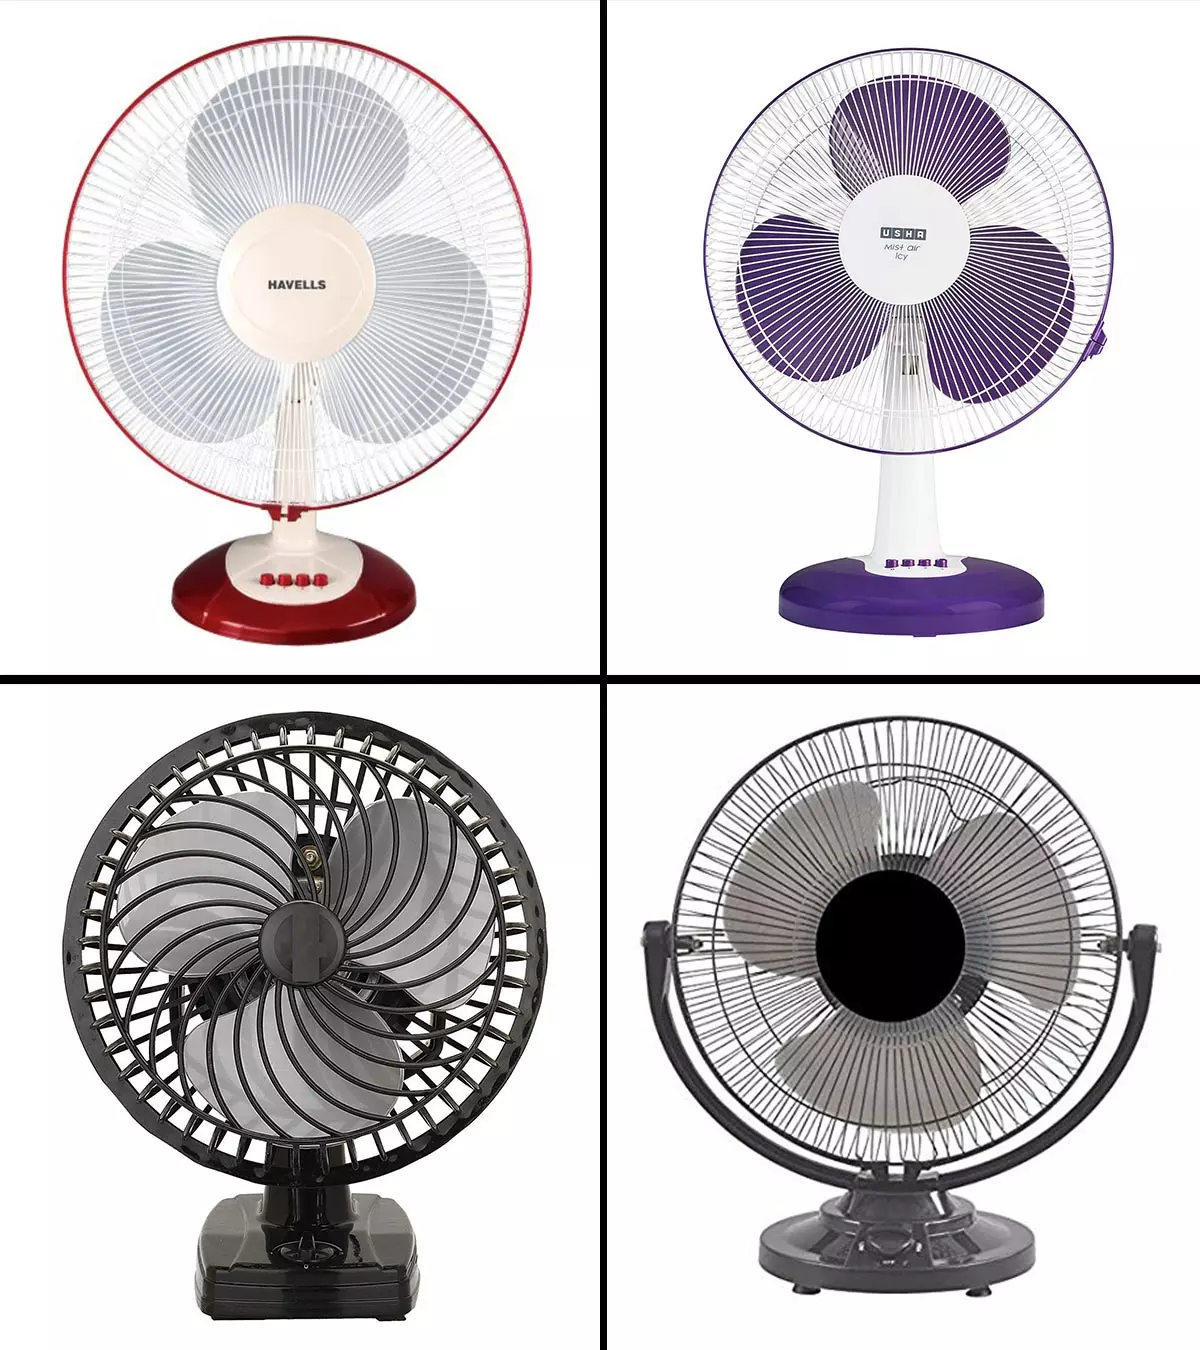 15 Best Table Fans for home & office in India in 2020